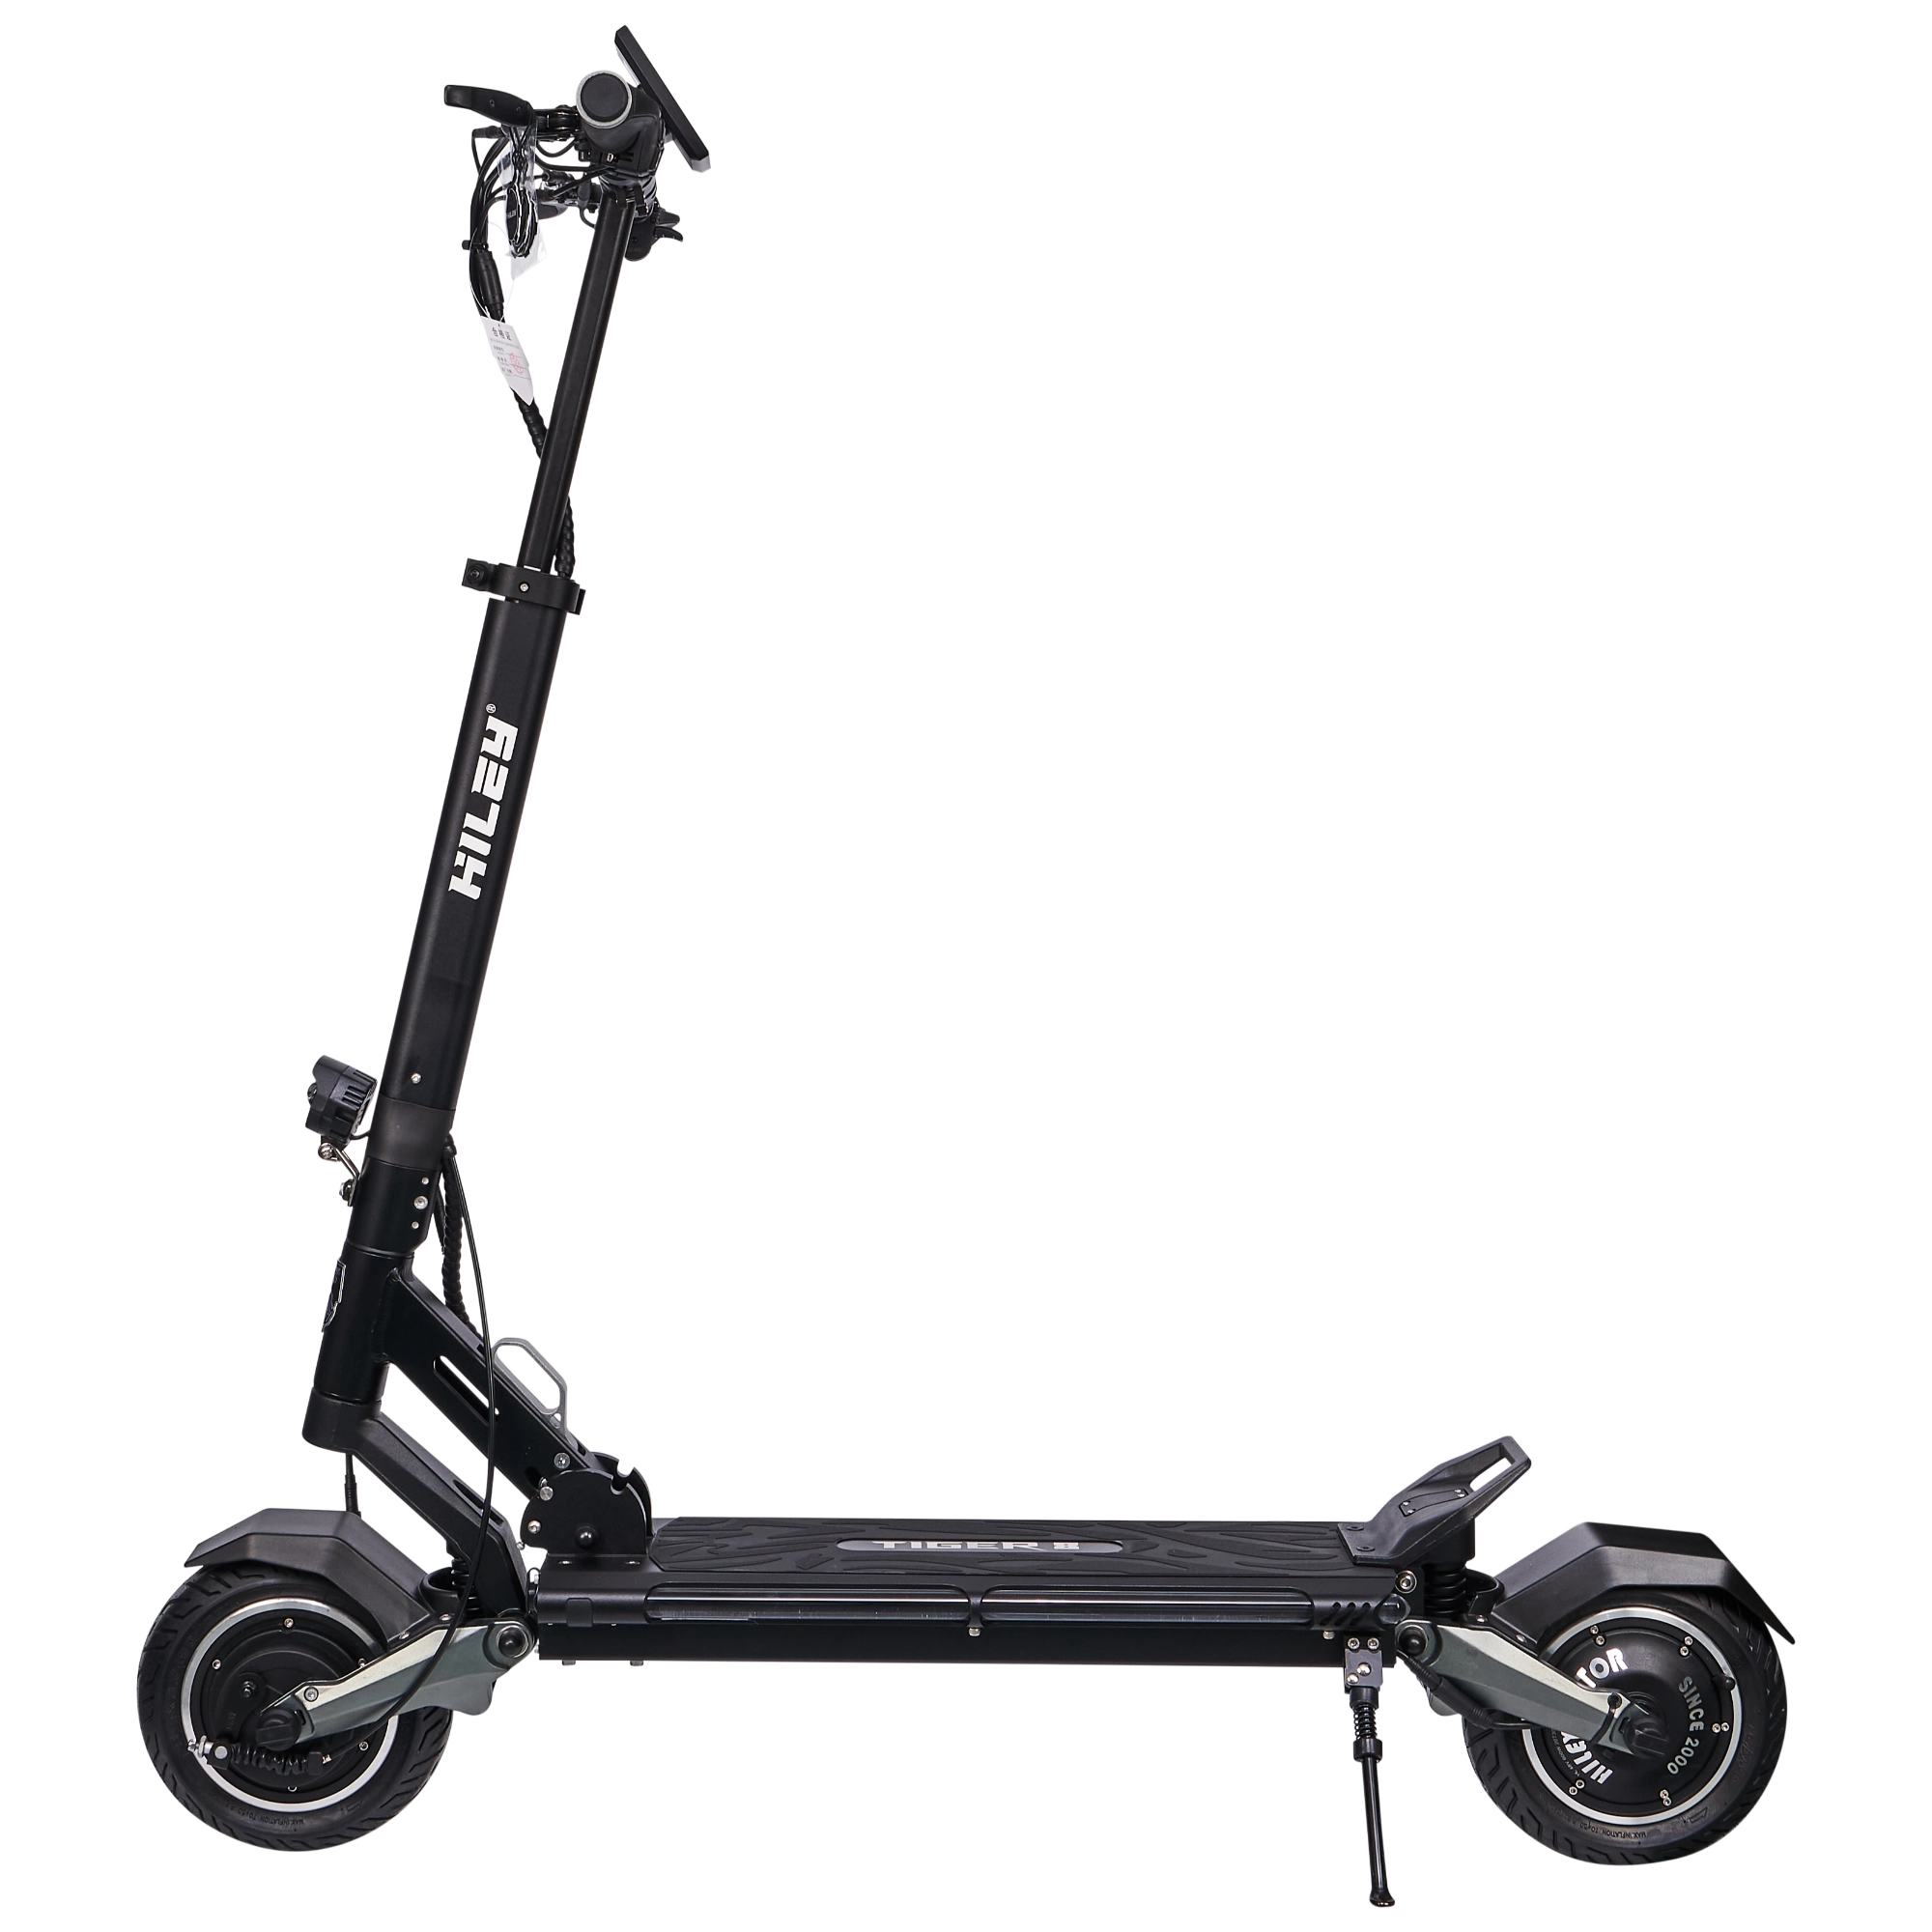 Hiley T8 GTR electric scooter, 2000 W